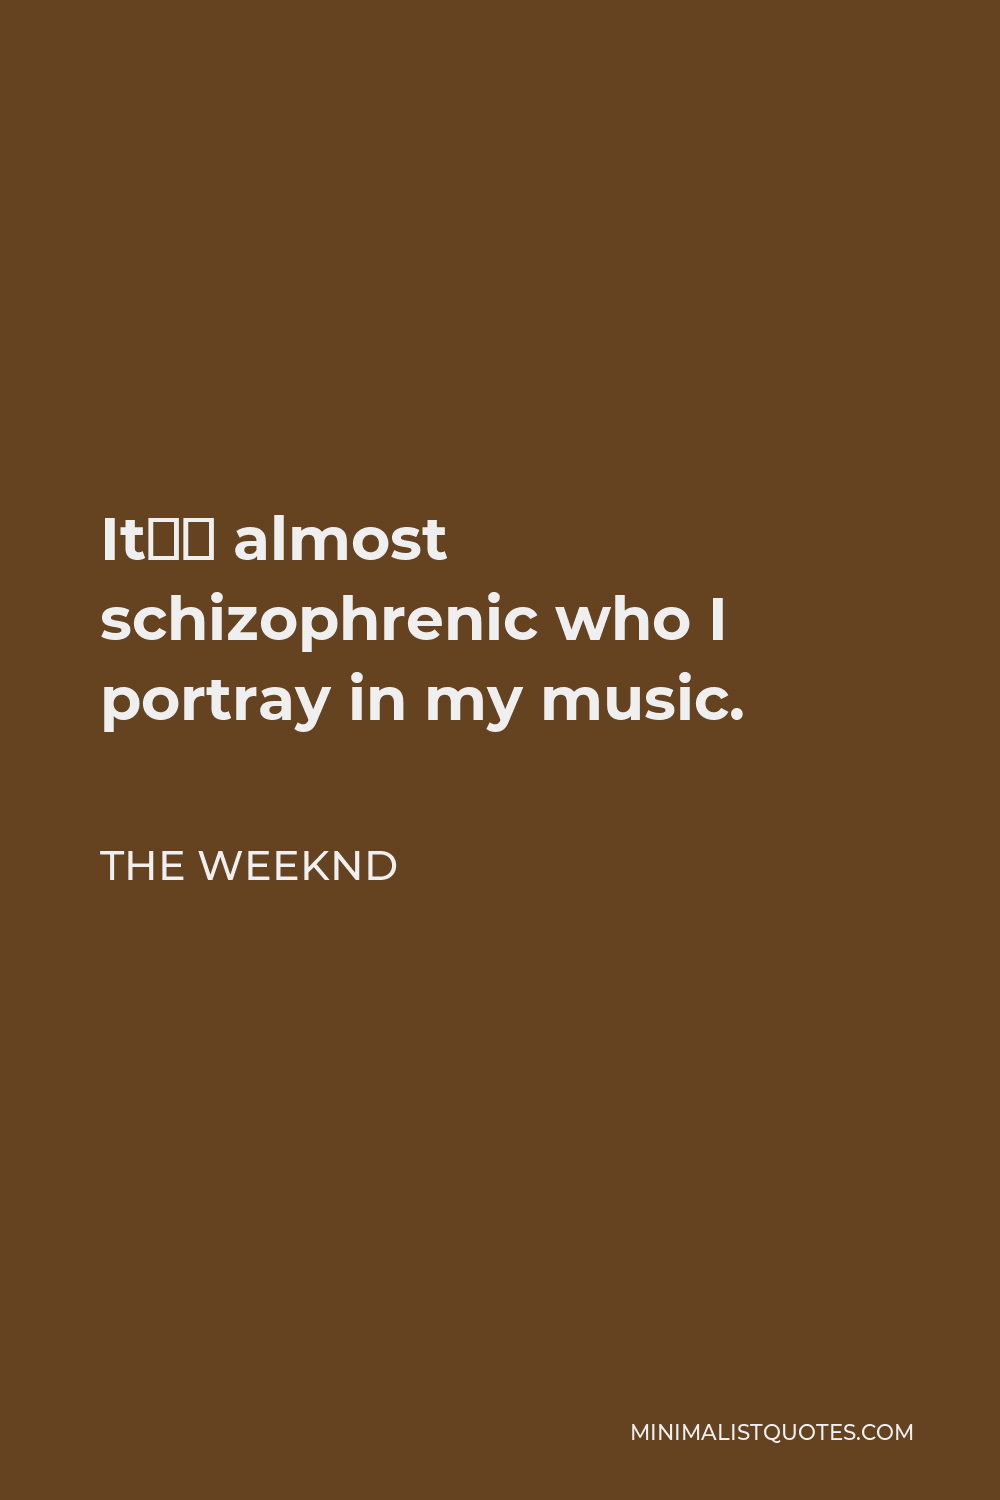 The Weeknd Quote - It’s almost schizophrenic who I portray in my music.